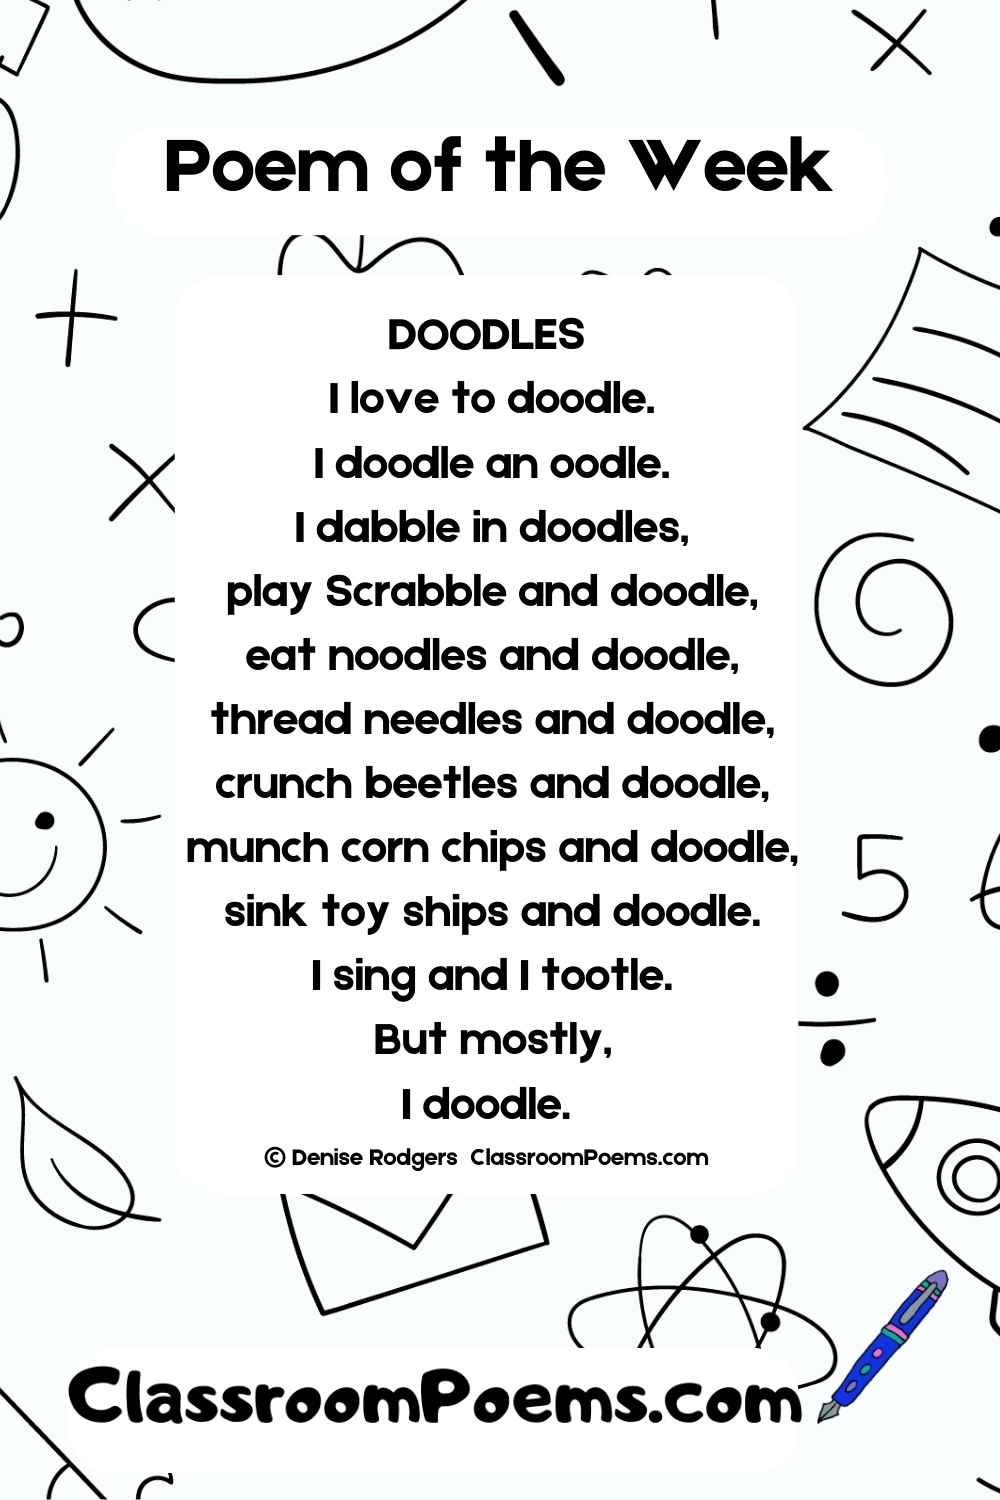 DOODLES, a poem of the week by Denise Rodgers on ClassroomPoems.com.